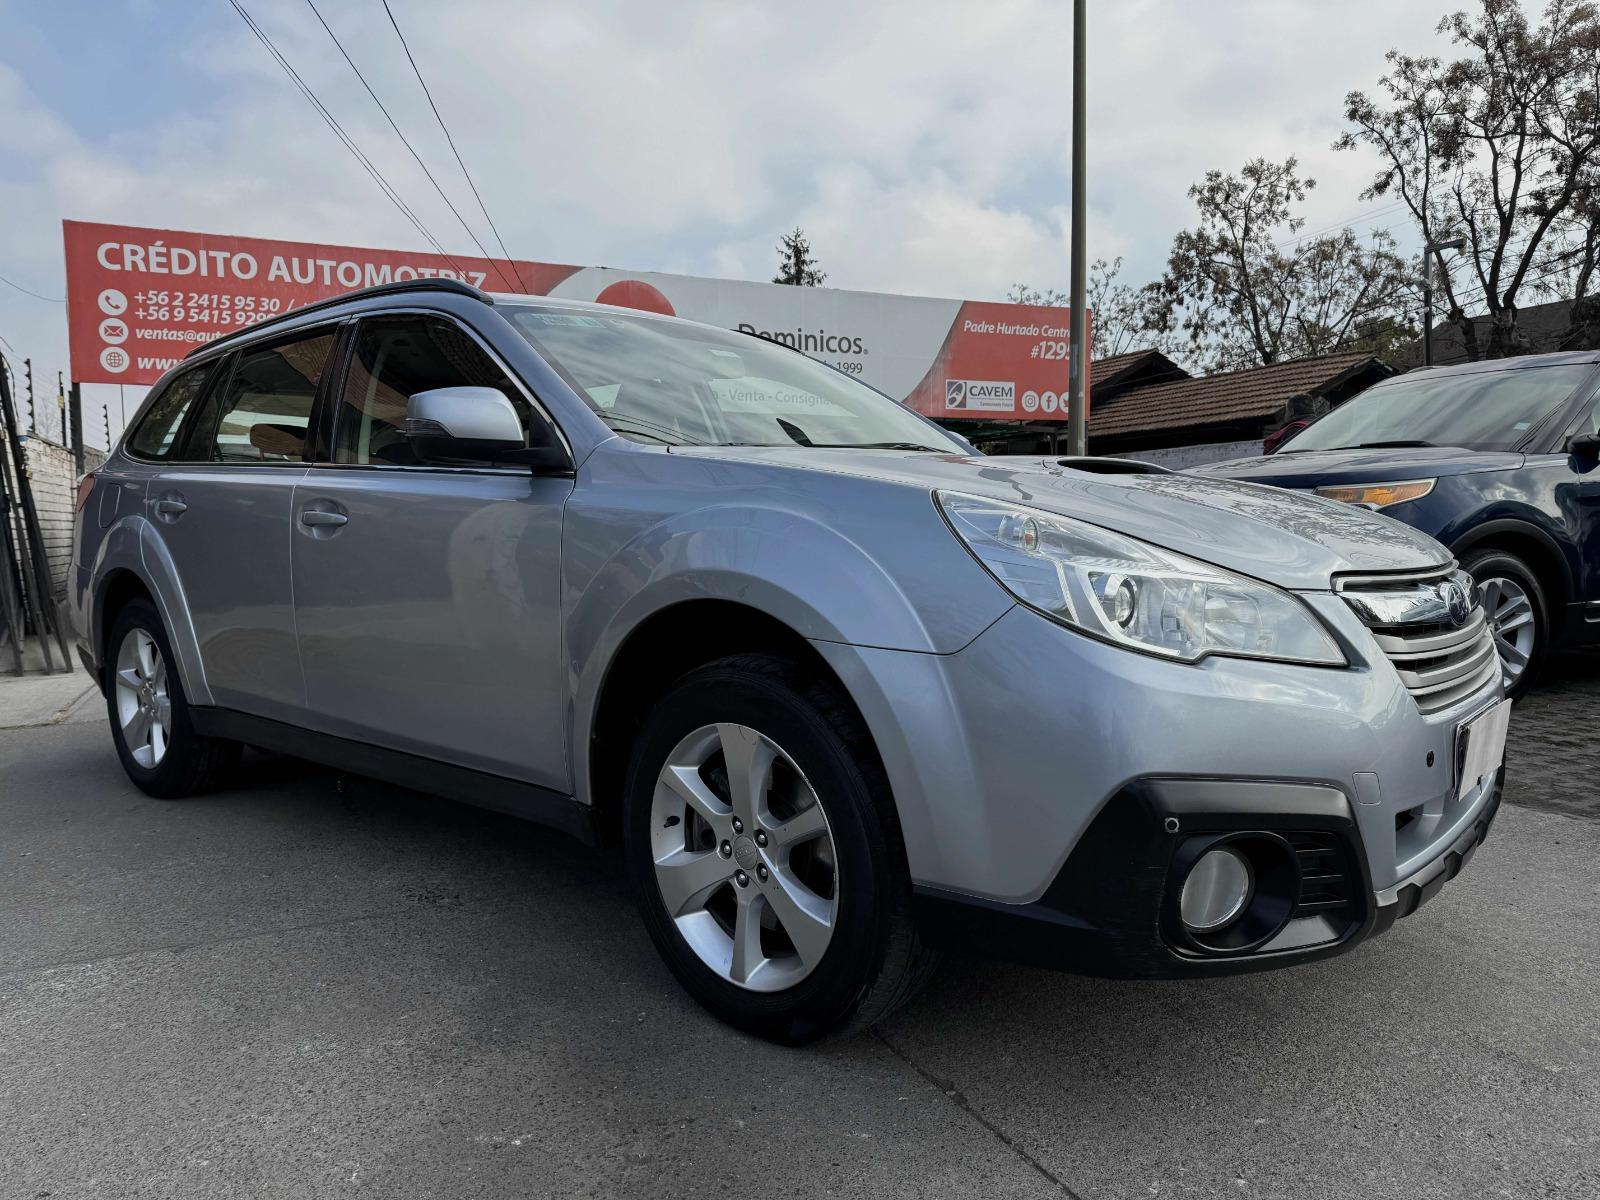 SUBARU OUTBACK outback xs diesel awd 2.0 2015  - 